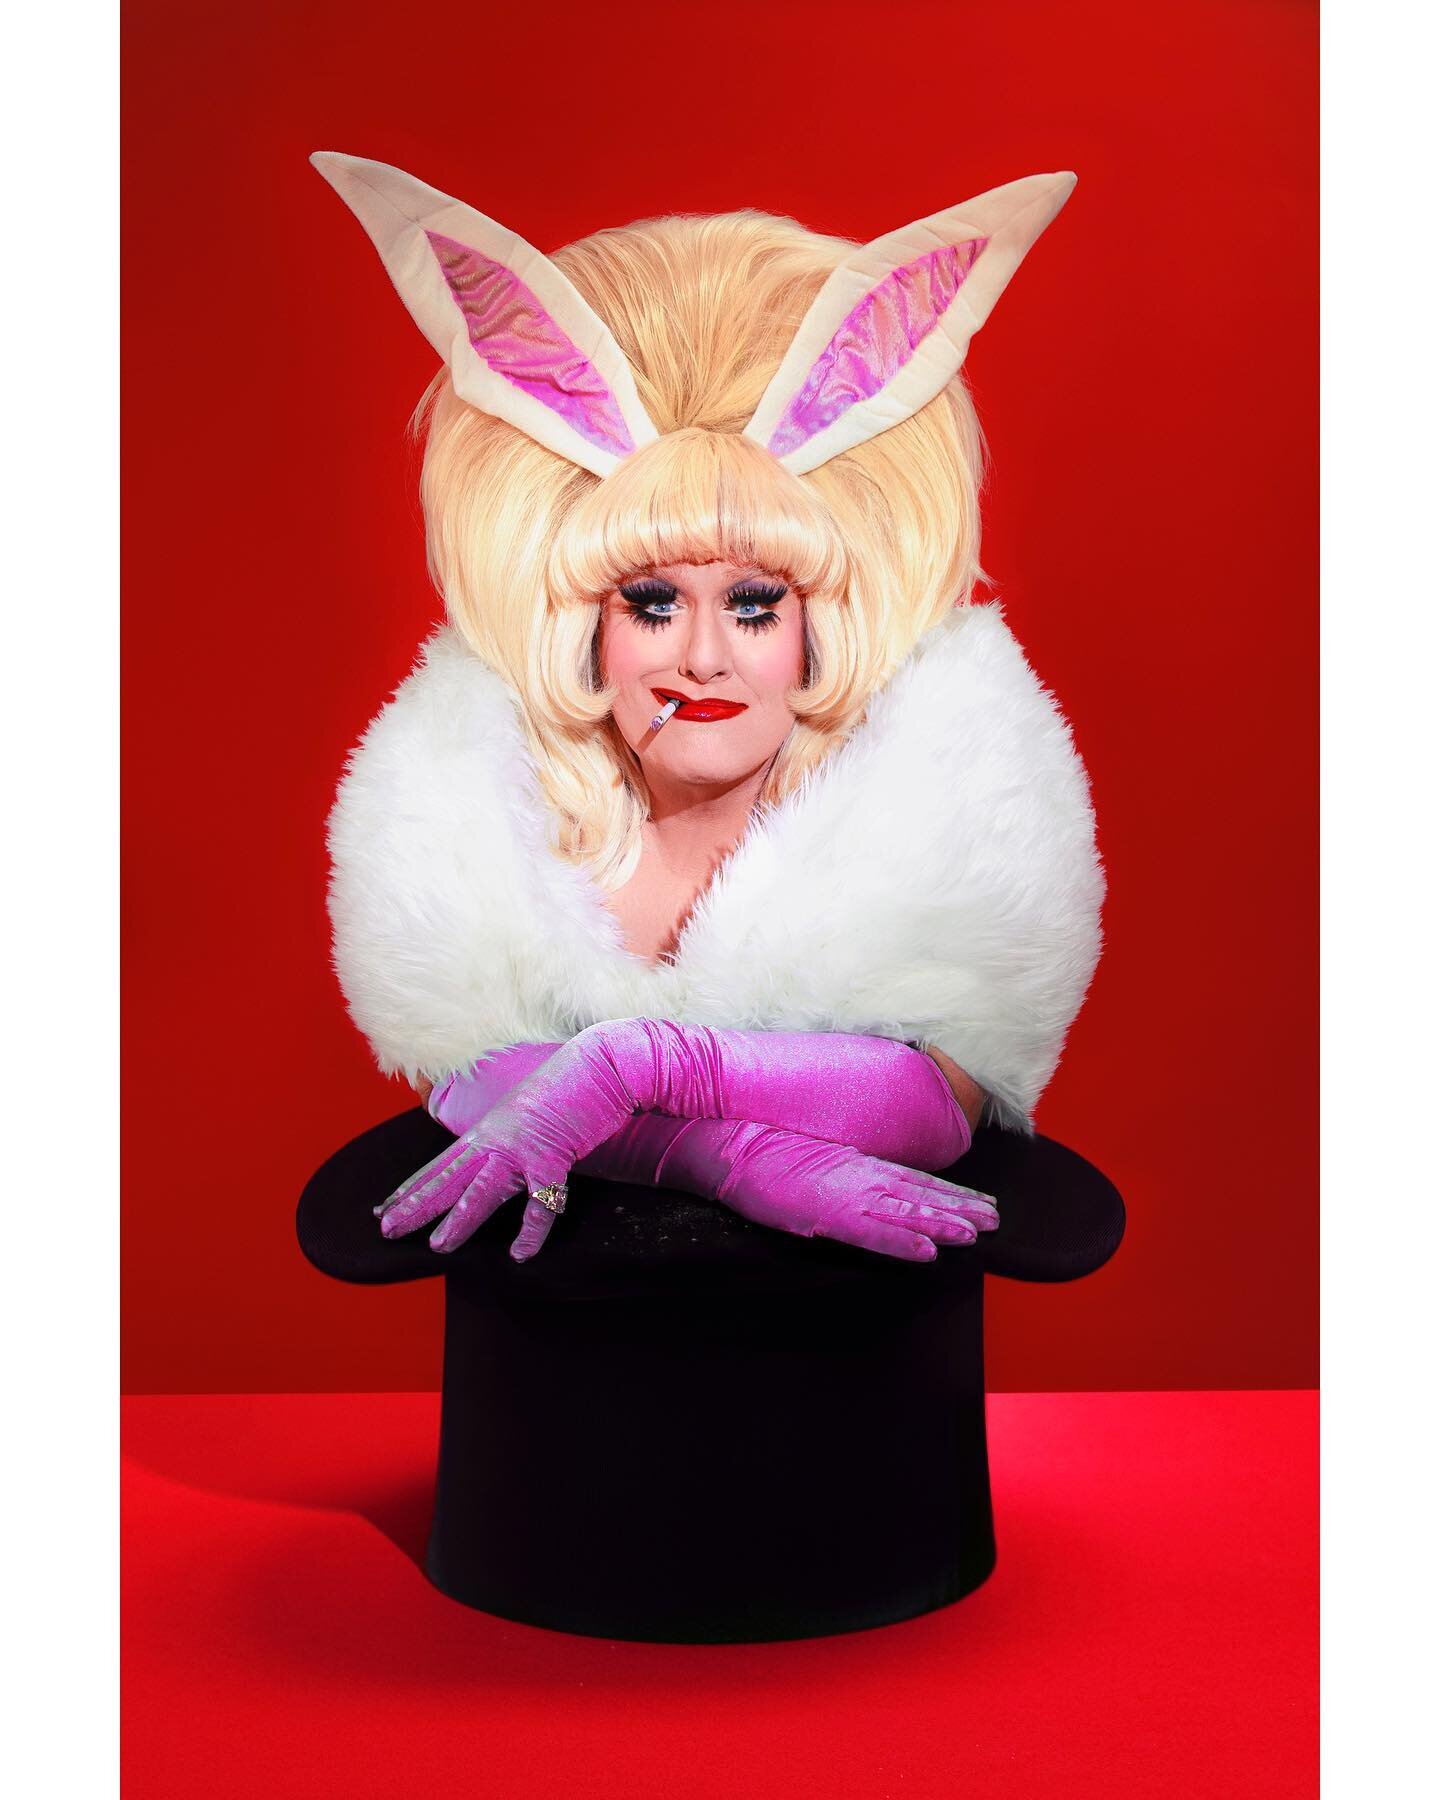 @martine.tv photographs @official_lady_bunny for @interviewmag shot at @cherrystudiosnyc